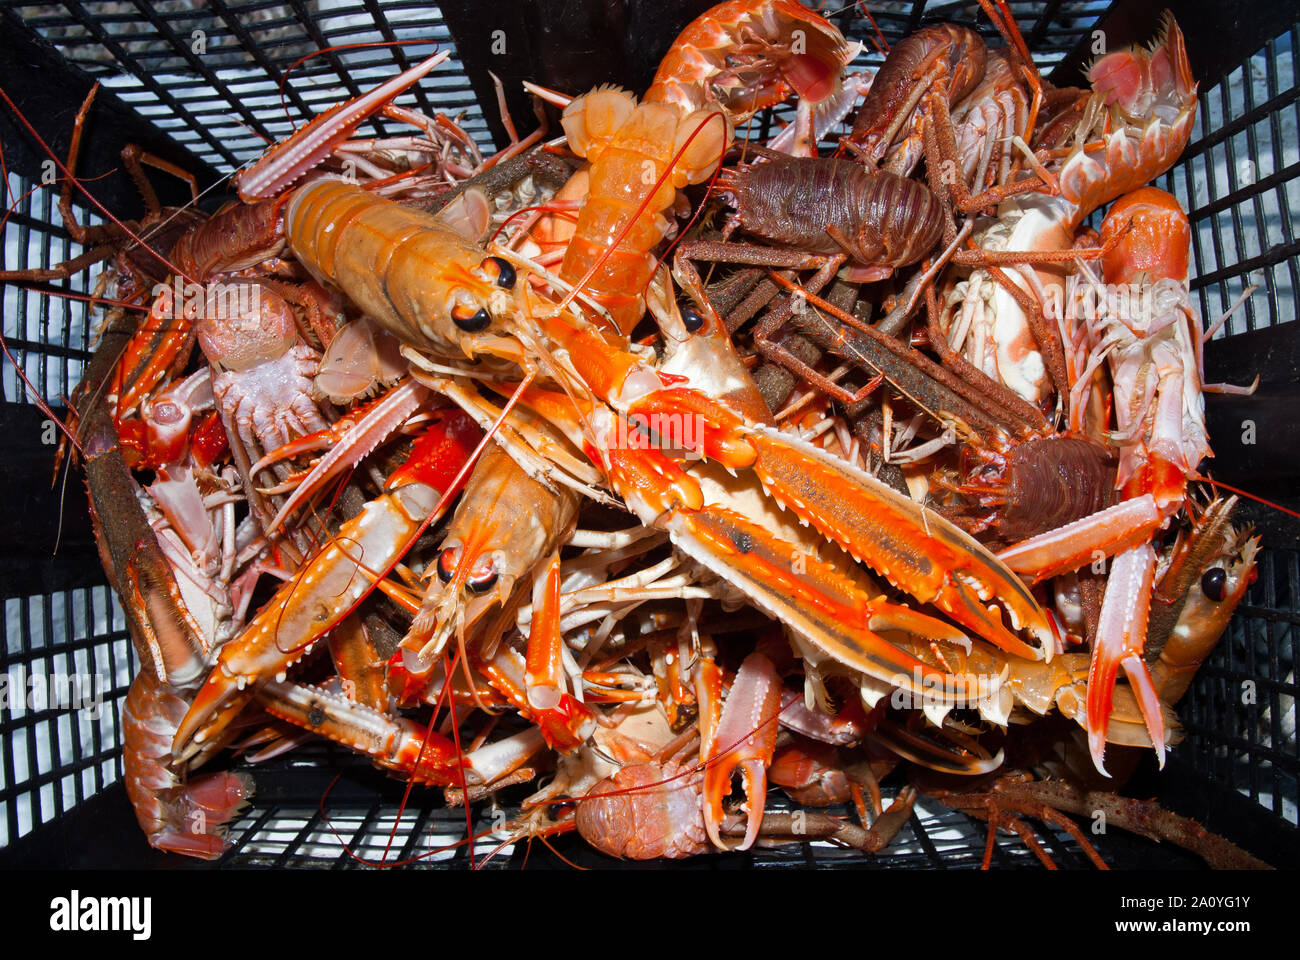 Colourful basket of Norway lobsters (Nephrops norvegicus) and squat lobsters (Galathea squamifera), caught by a creel fisherman, Scotland, UK. Stock Photo